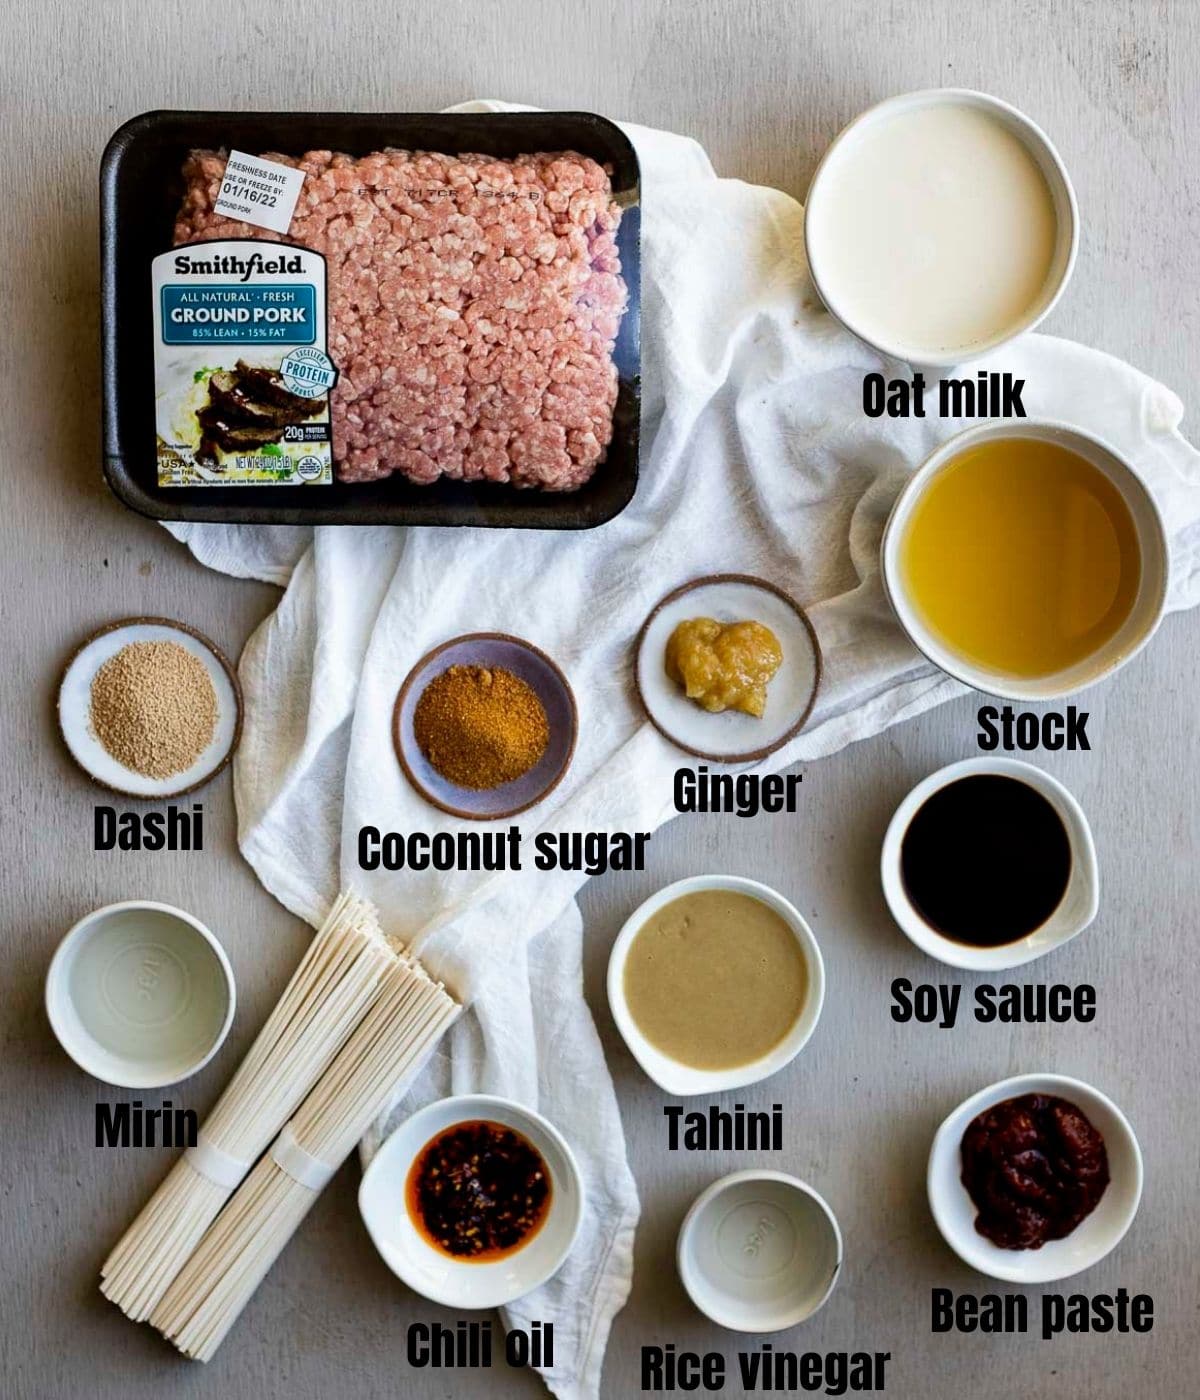 Ingredients to make tan tan ramen arranged individually and labelled.